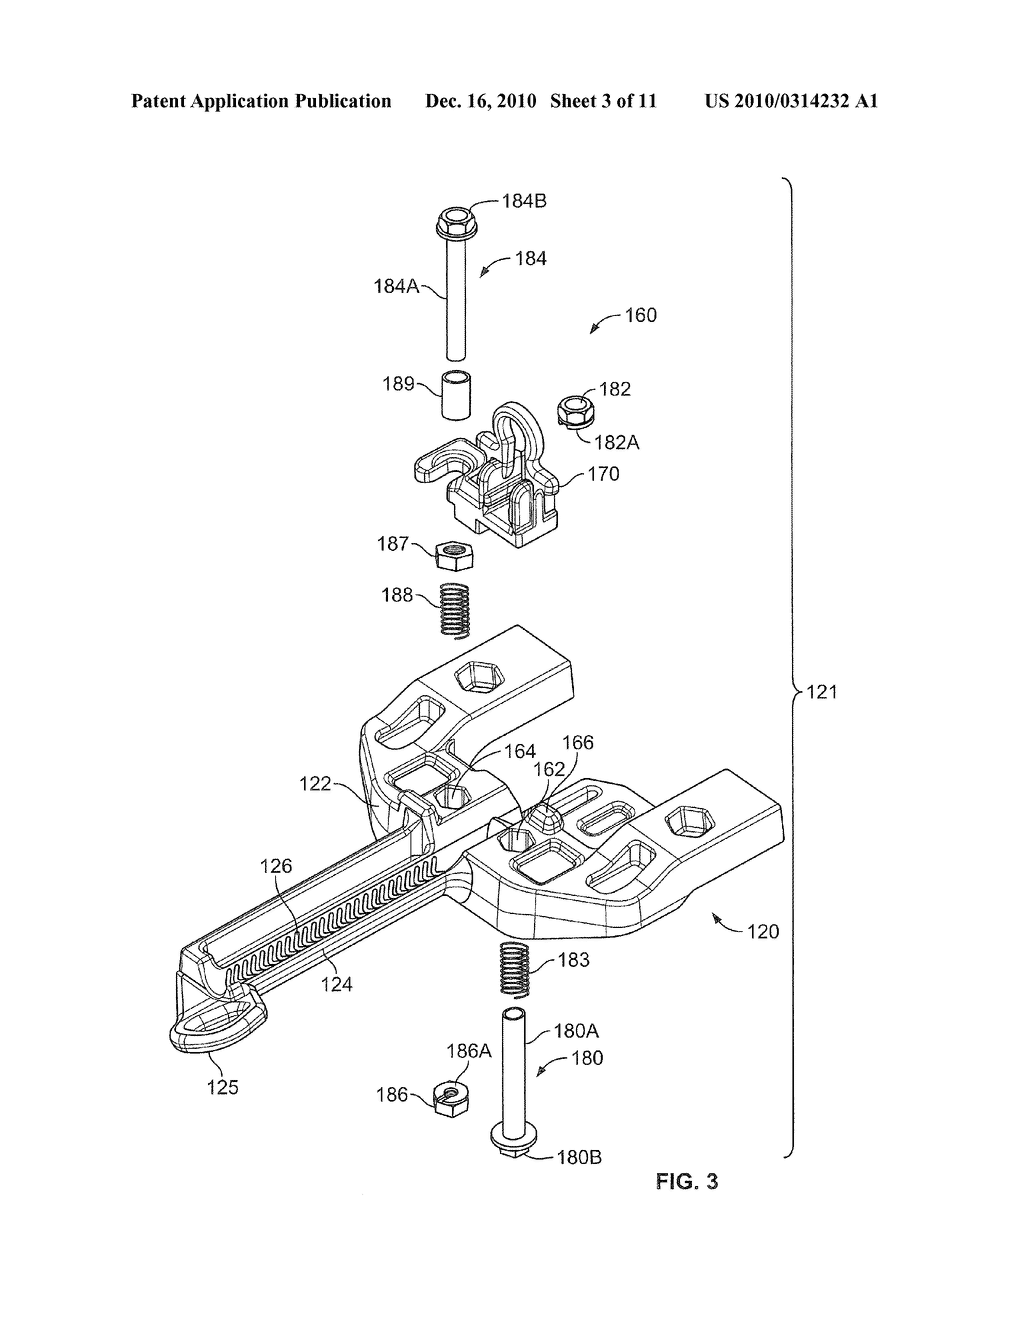 CABLE TERMINATION SYSTEMS AND ISOLATING APPARATUS FOR ELECTRICAL POWER TRANSMISSION CONDUCTORS AND METHODS USING THE SAME - diagram, schematic, and image 04